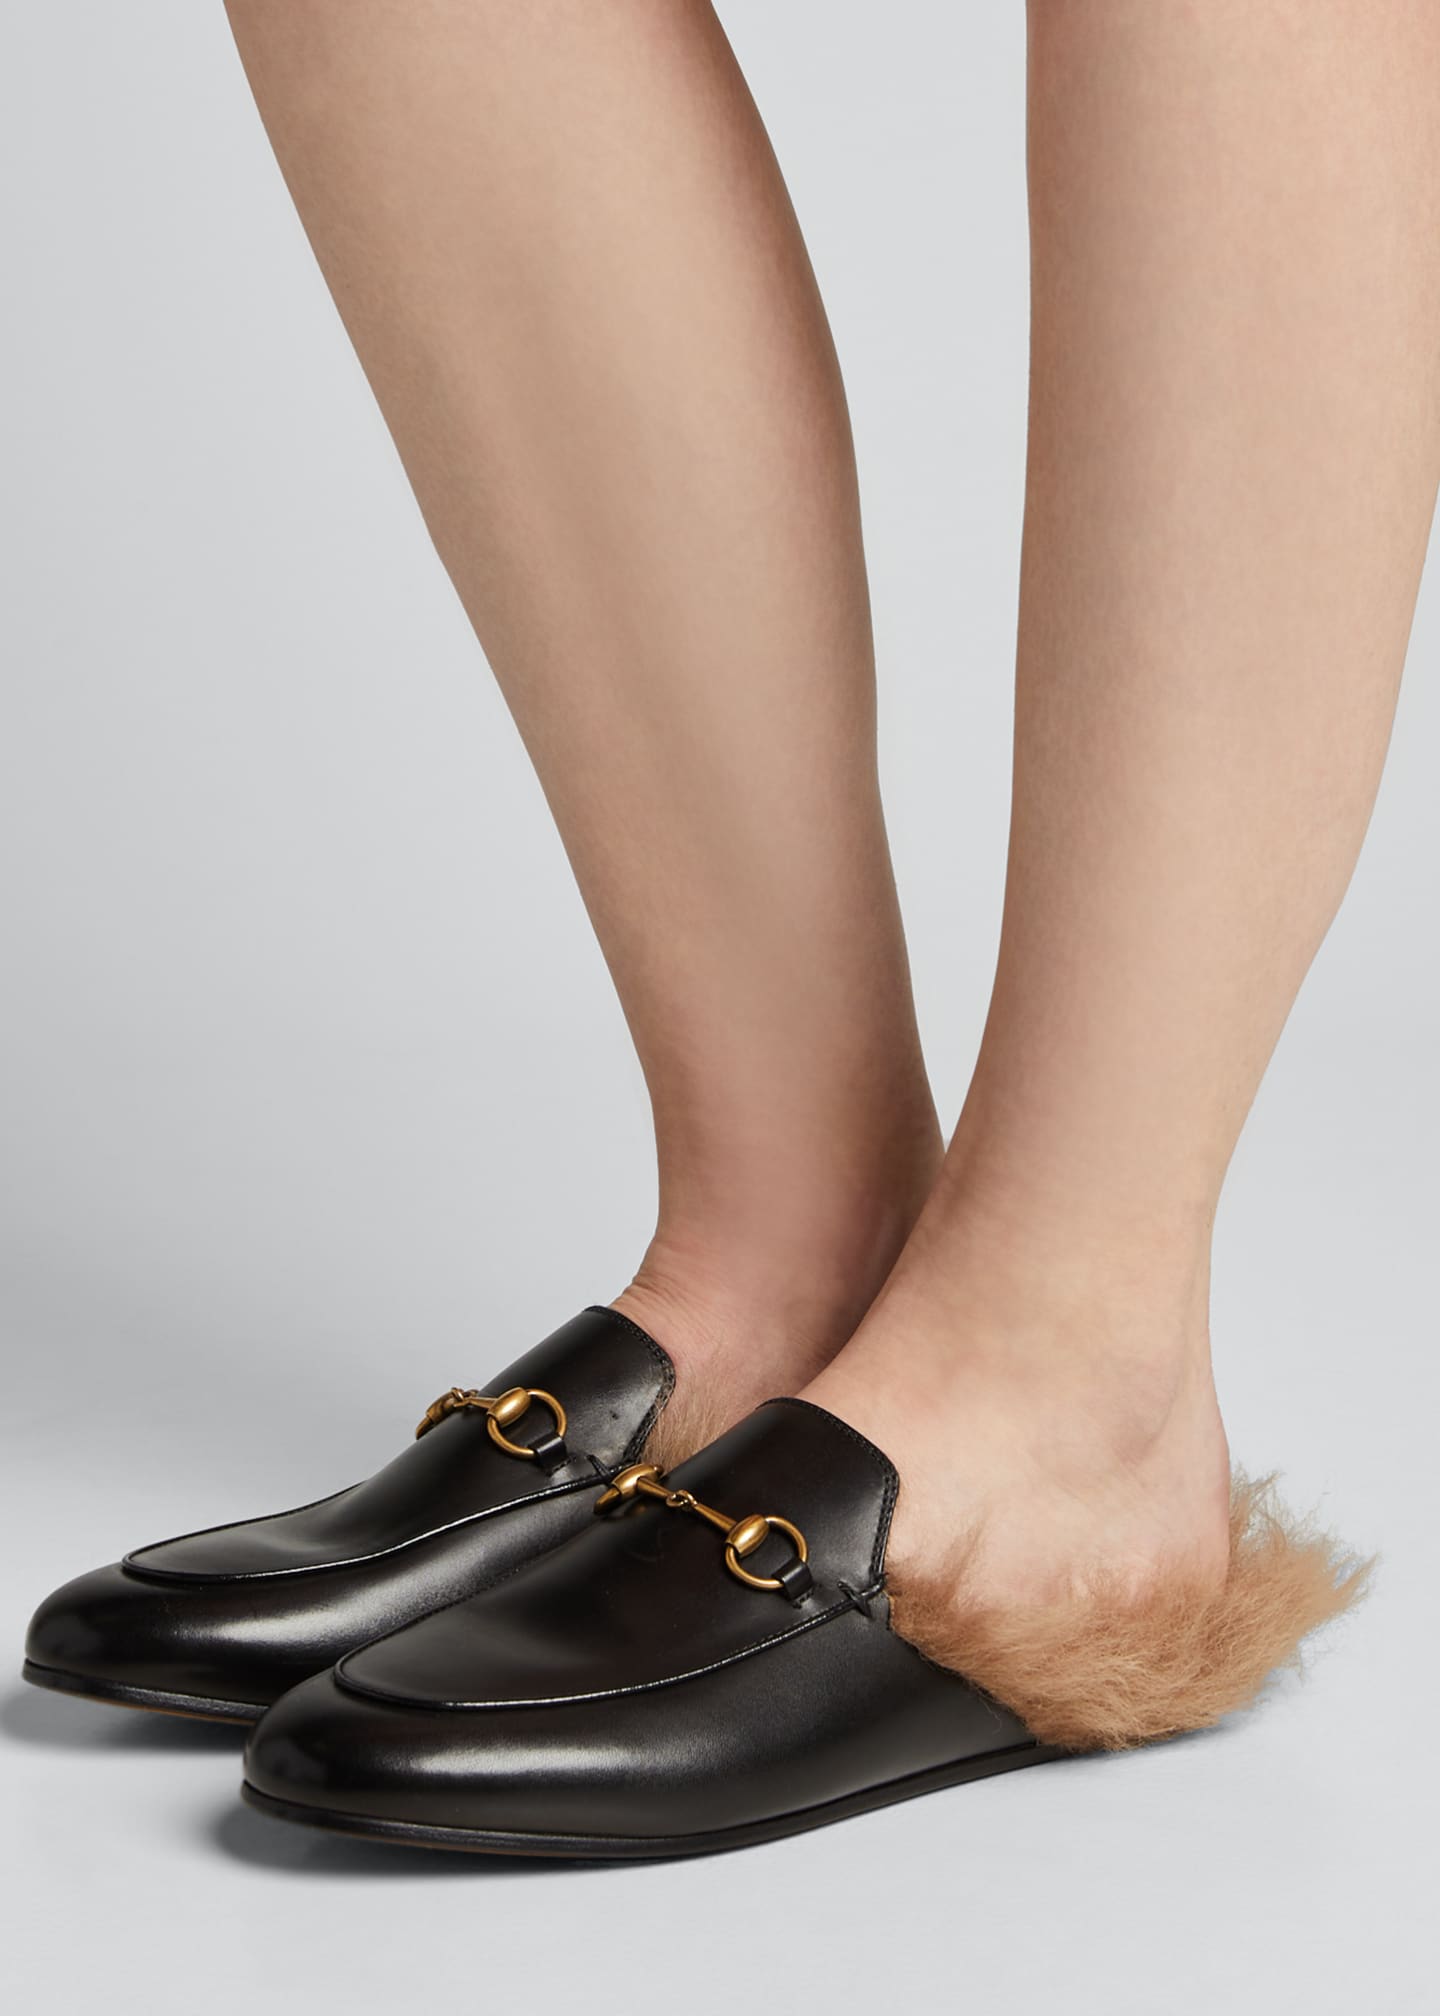 Gucci Princetown Fur Lined Mule Image 2 of 5